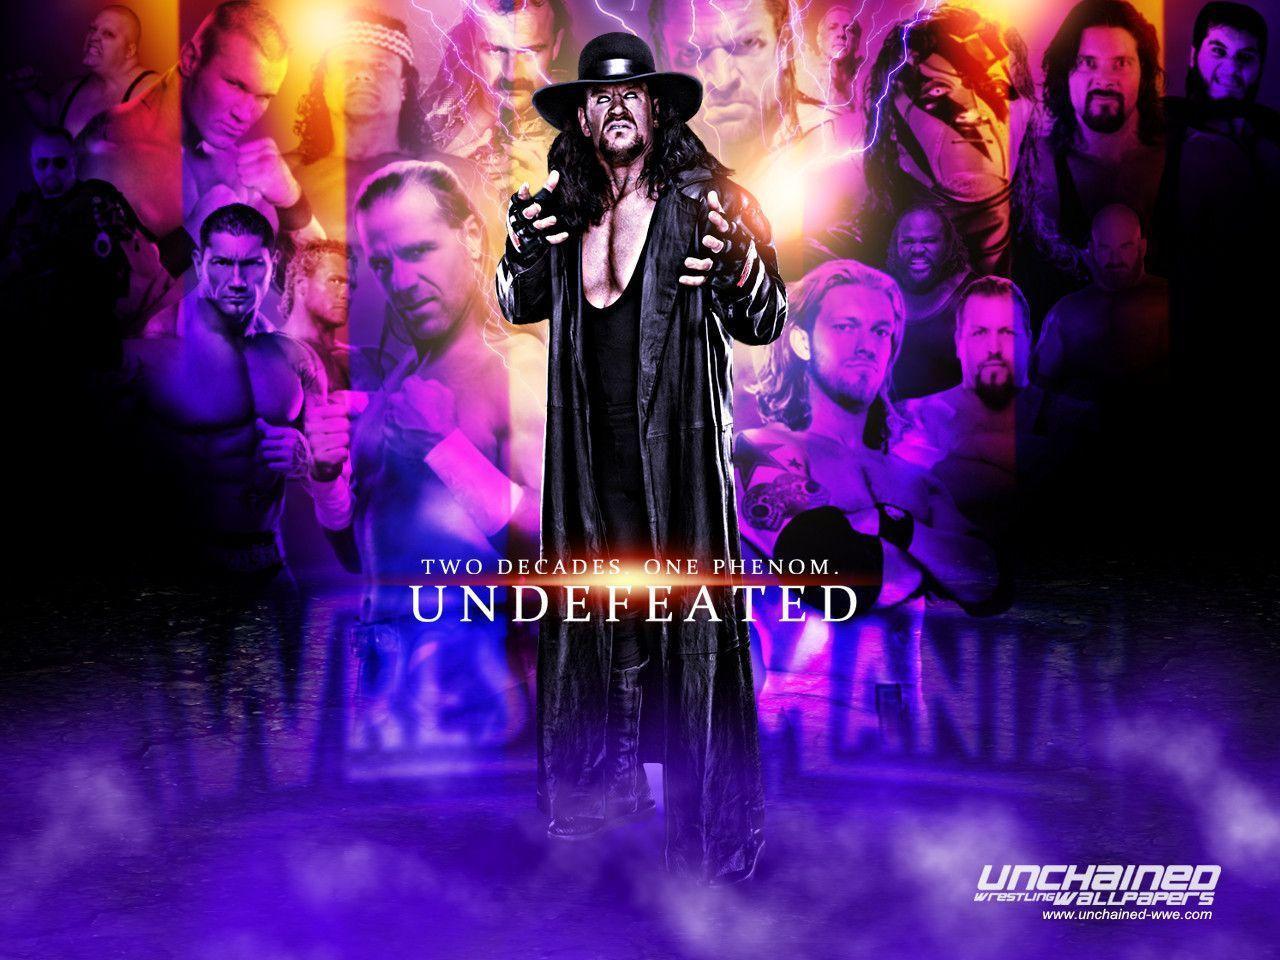 Undertaker Undefeated